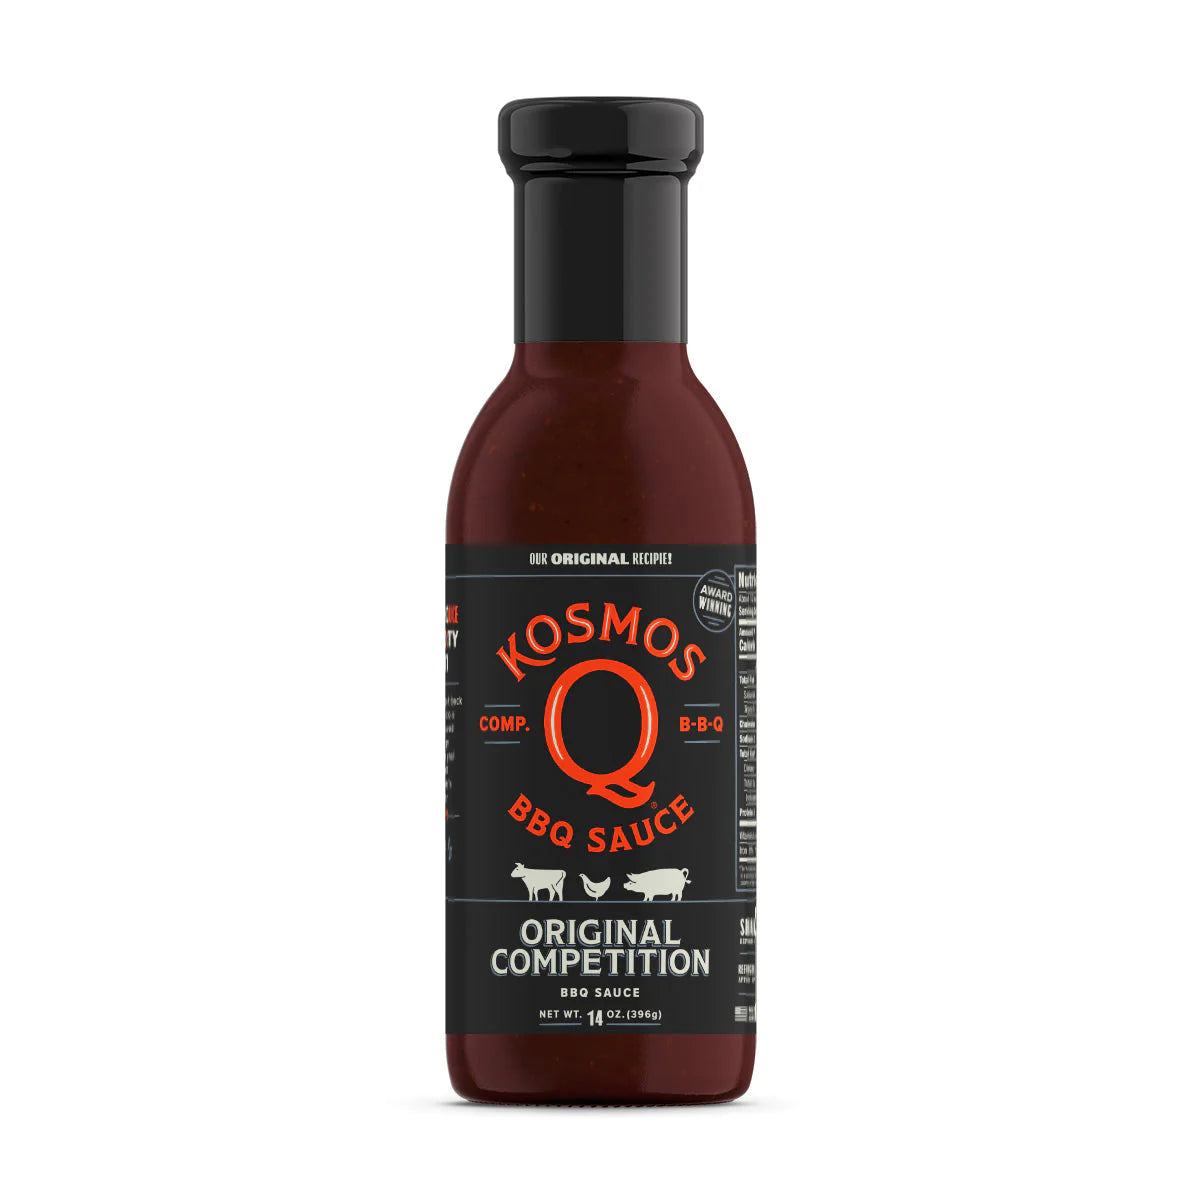 Kosmo's Q Competition BBQ Sauce Condiments & Sauces 12023331